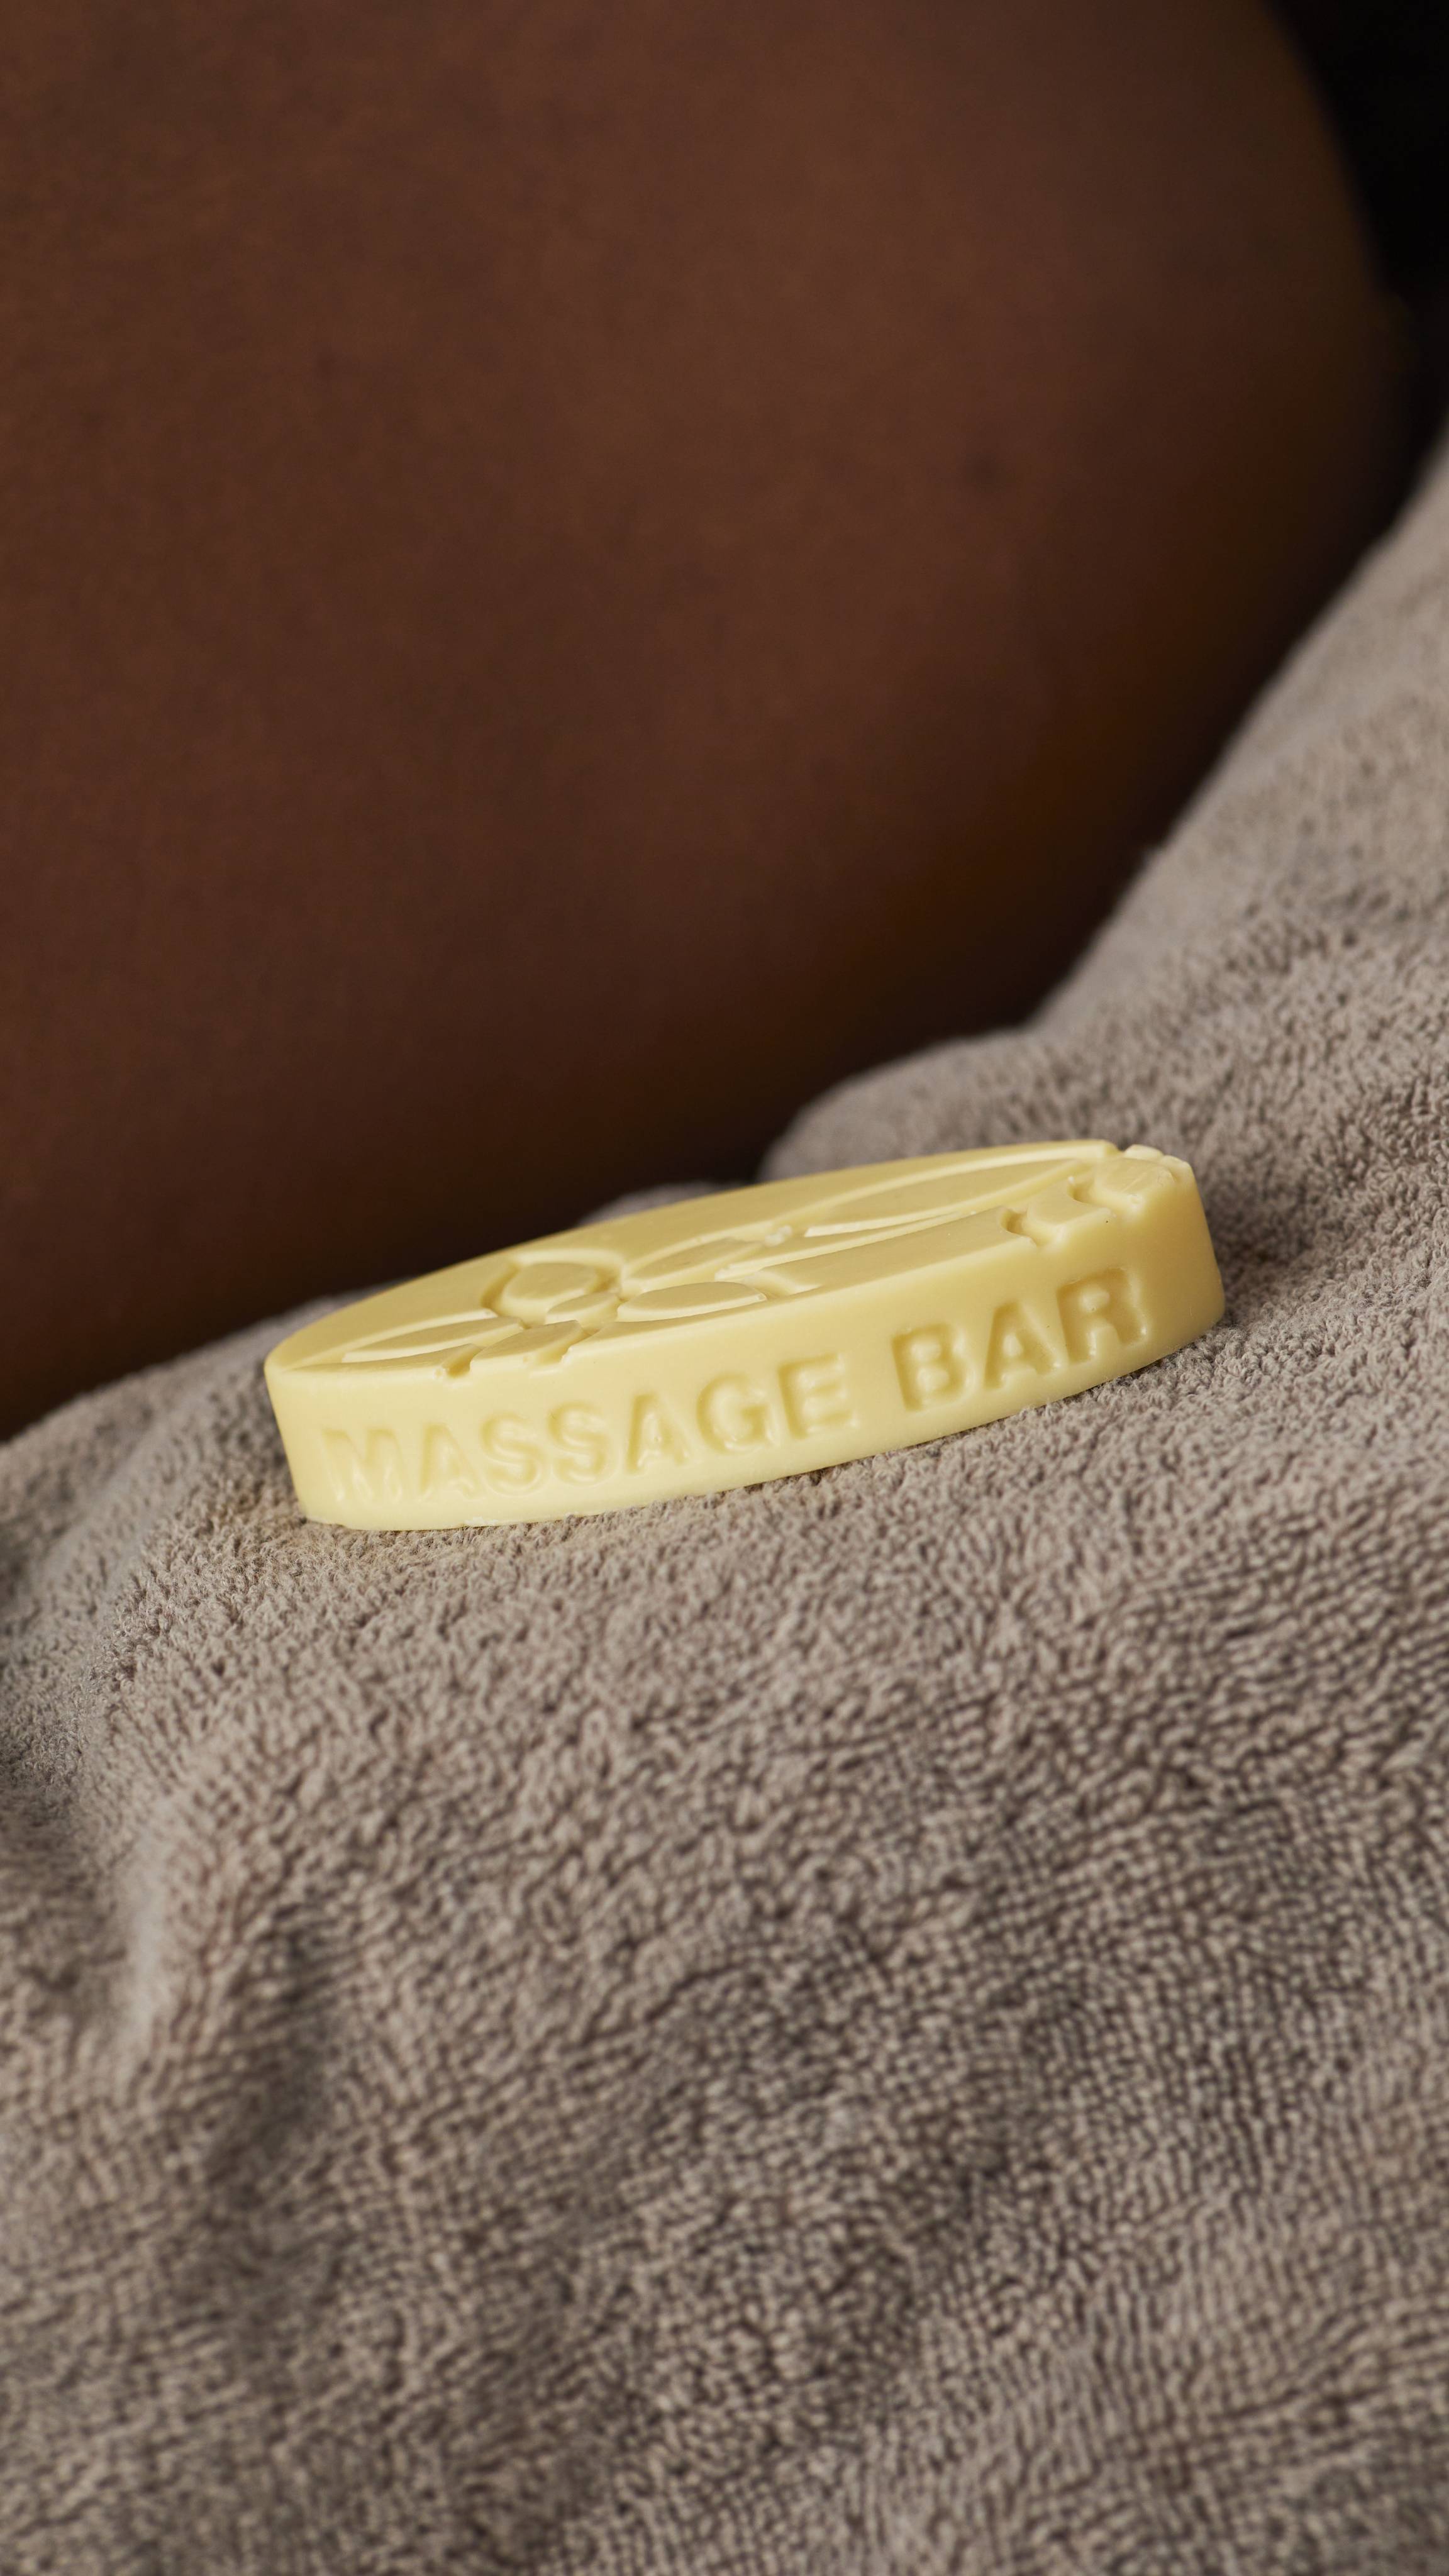 The image shows a super close-up of the Sex Bomb massage bar as it sits on a light brown towel. 